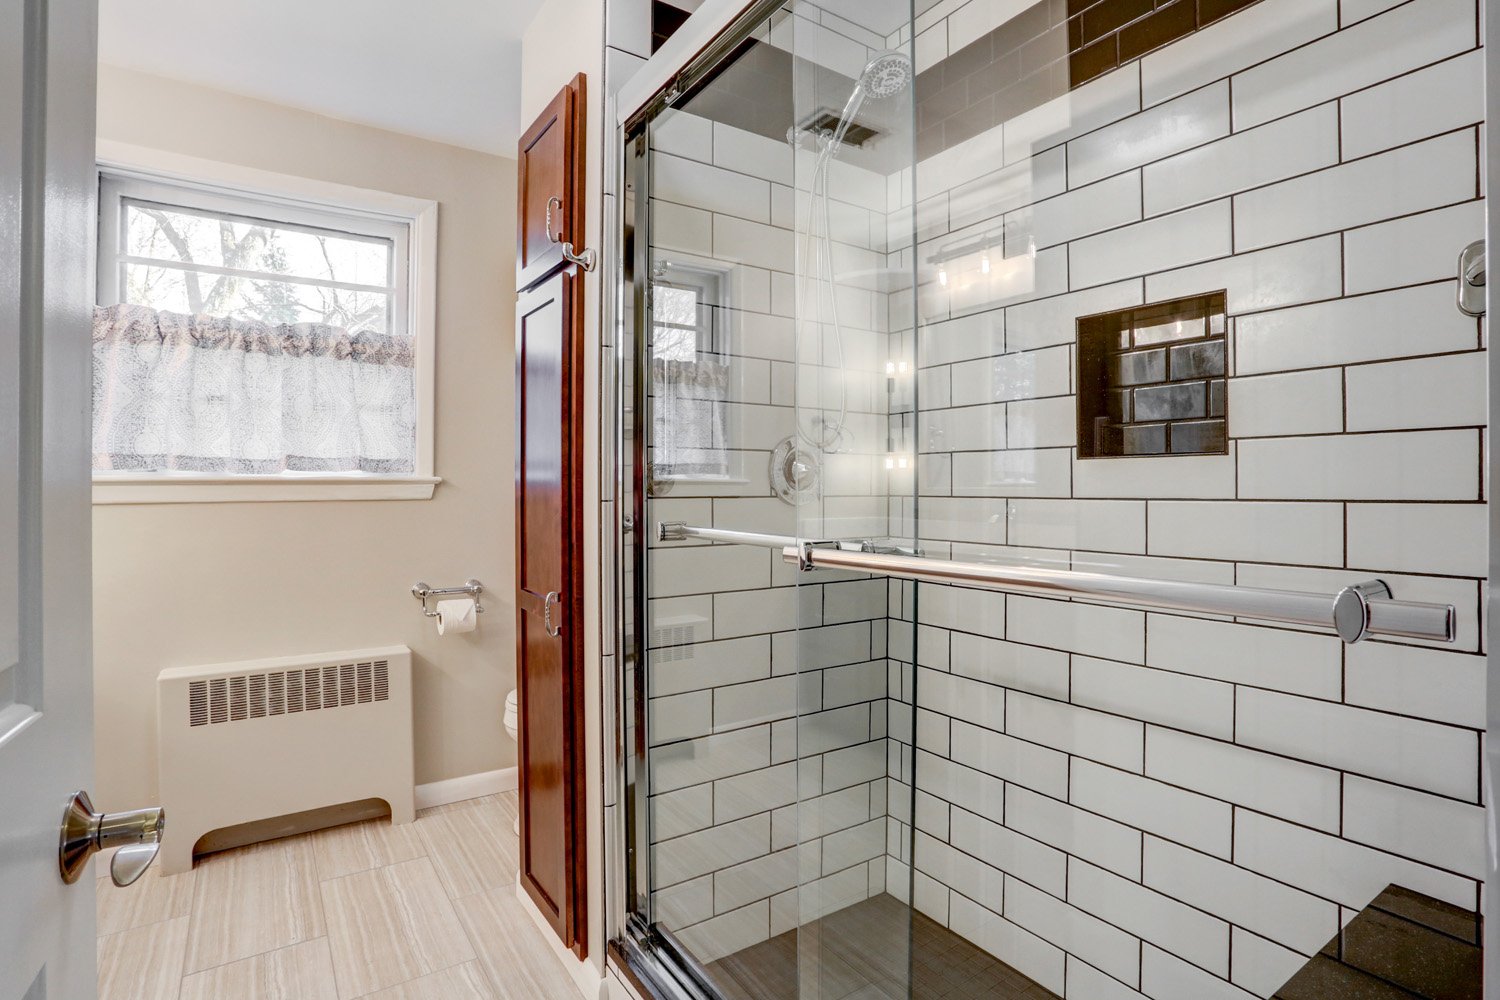 Manheim Township Bathroom Remodel with tile shower and sliding glass doors